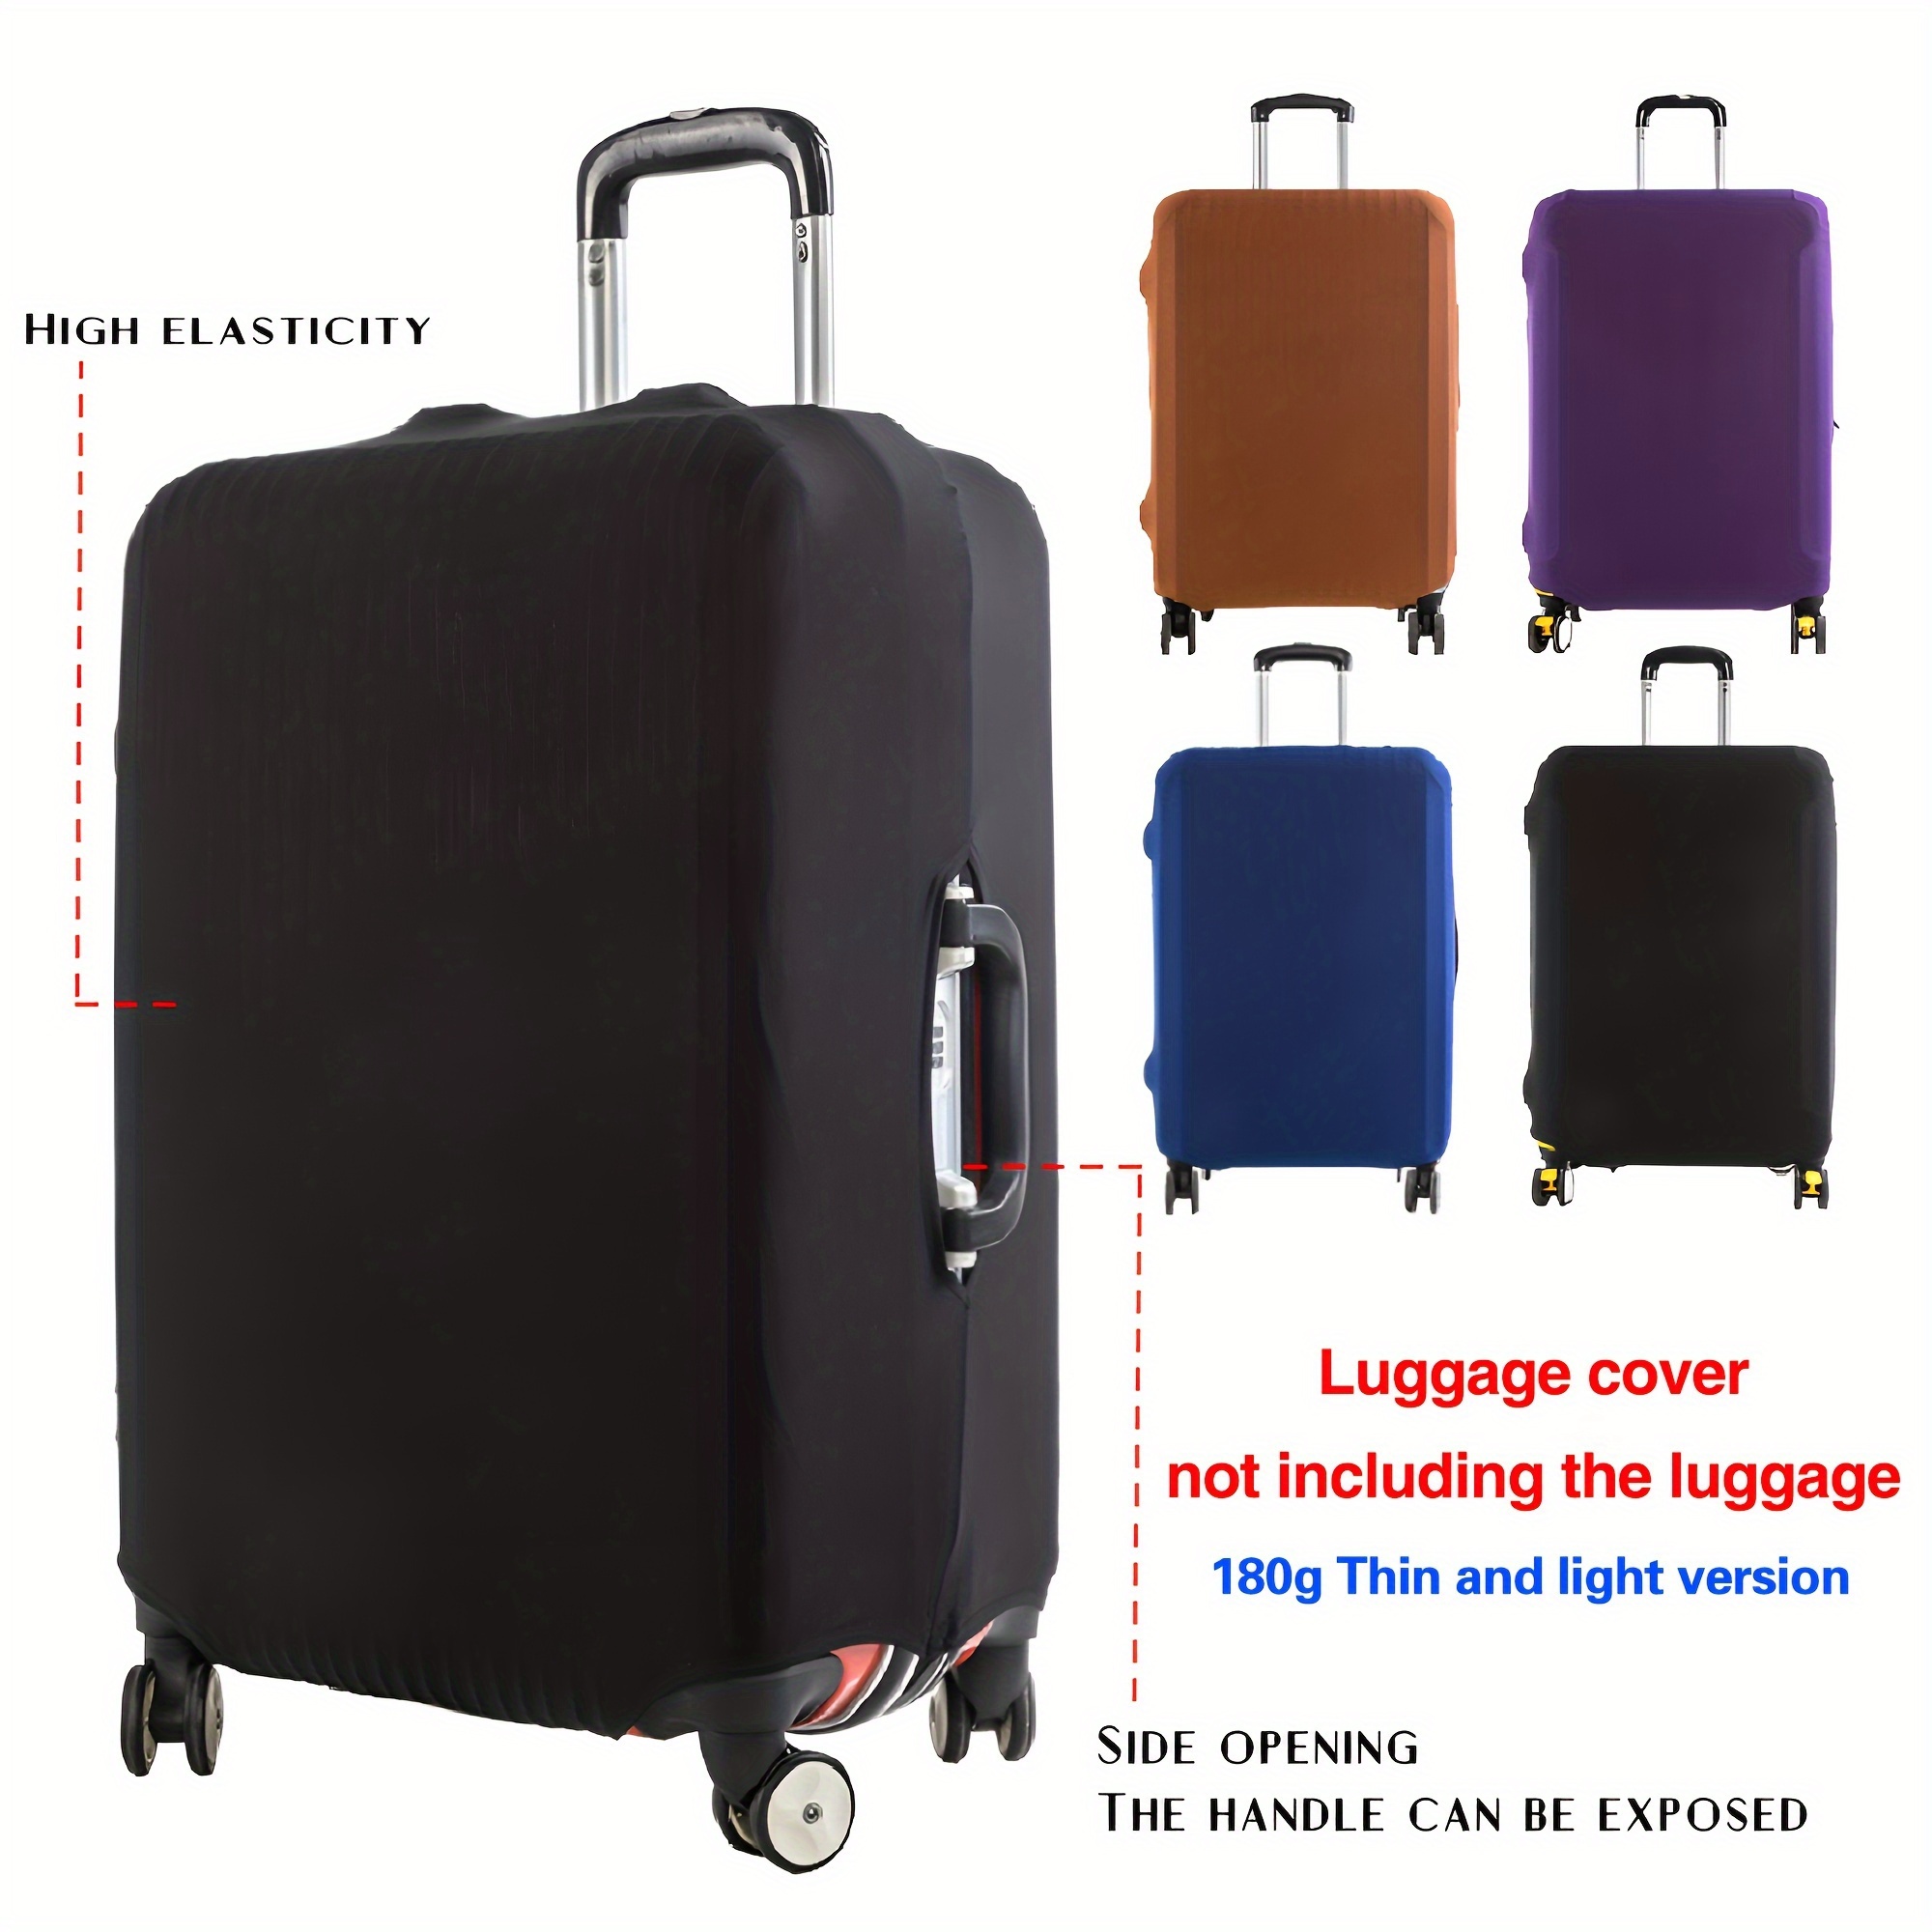 

Luggage Dust Cover, Trolley Case Protective Cover, High-elastic Luggage Cover, Thickened Luggage Dust Cover For Travel Cases